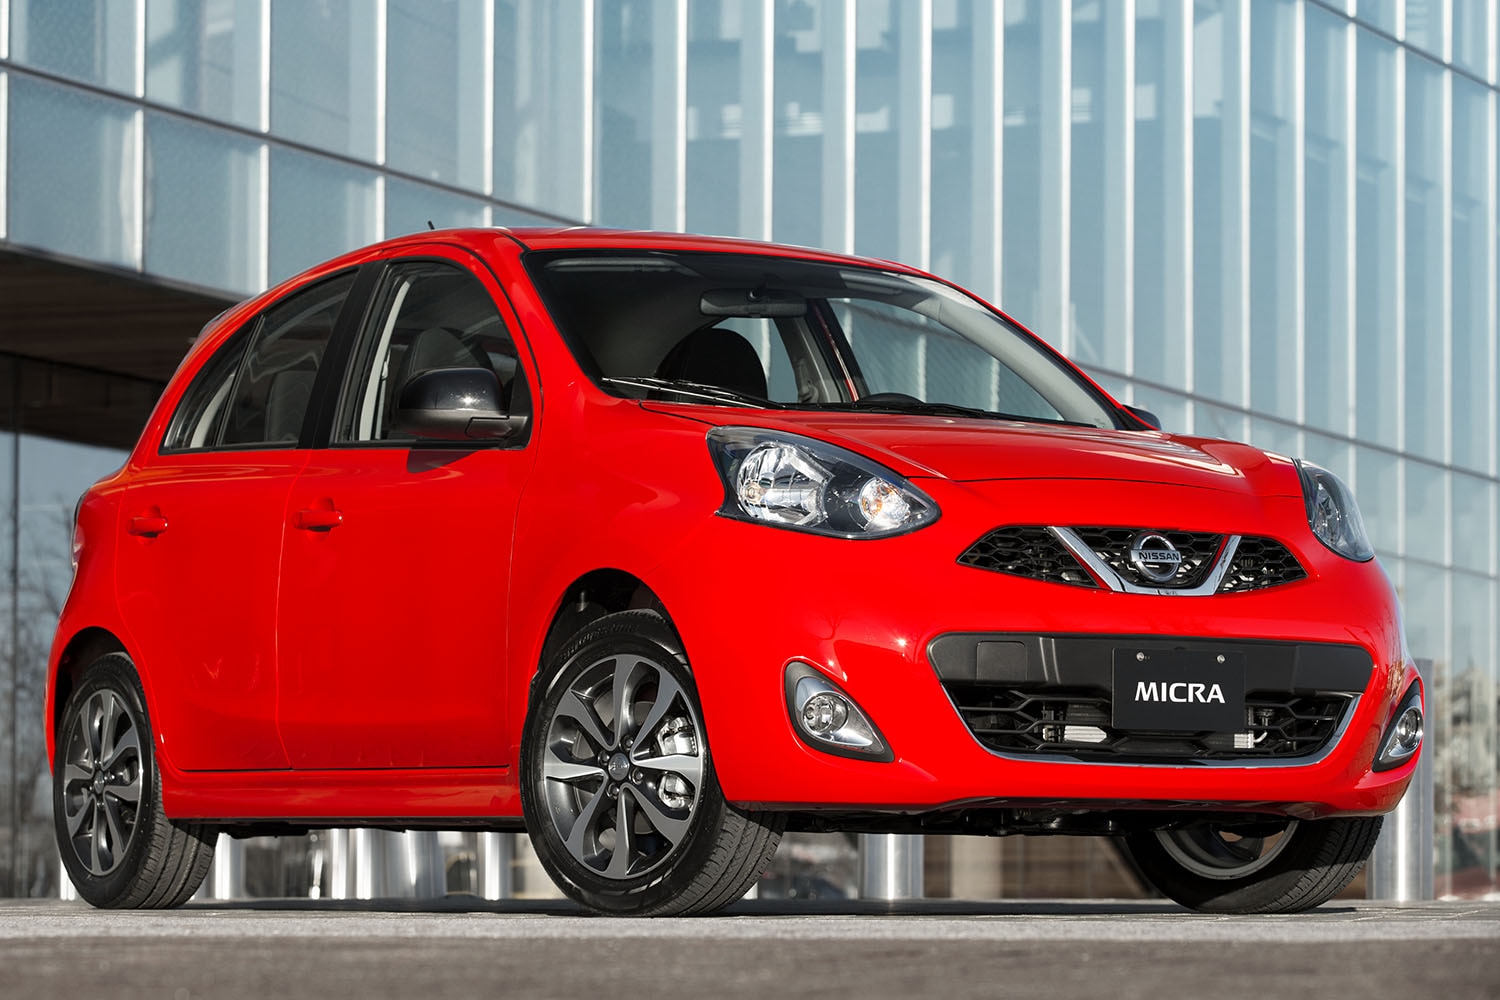 2019 Nissan Micra Brick Red front right quarter